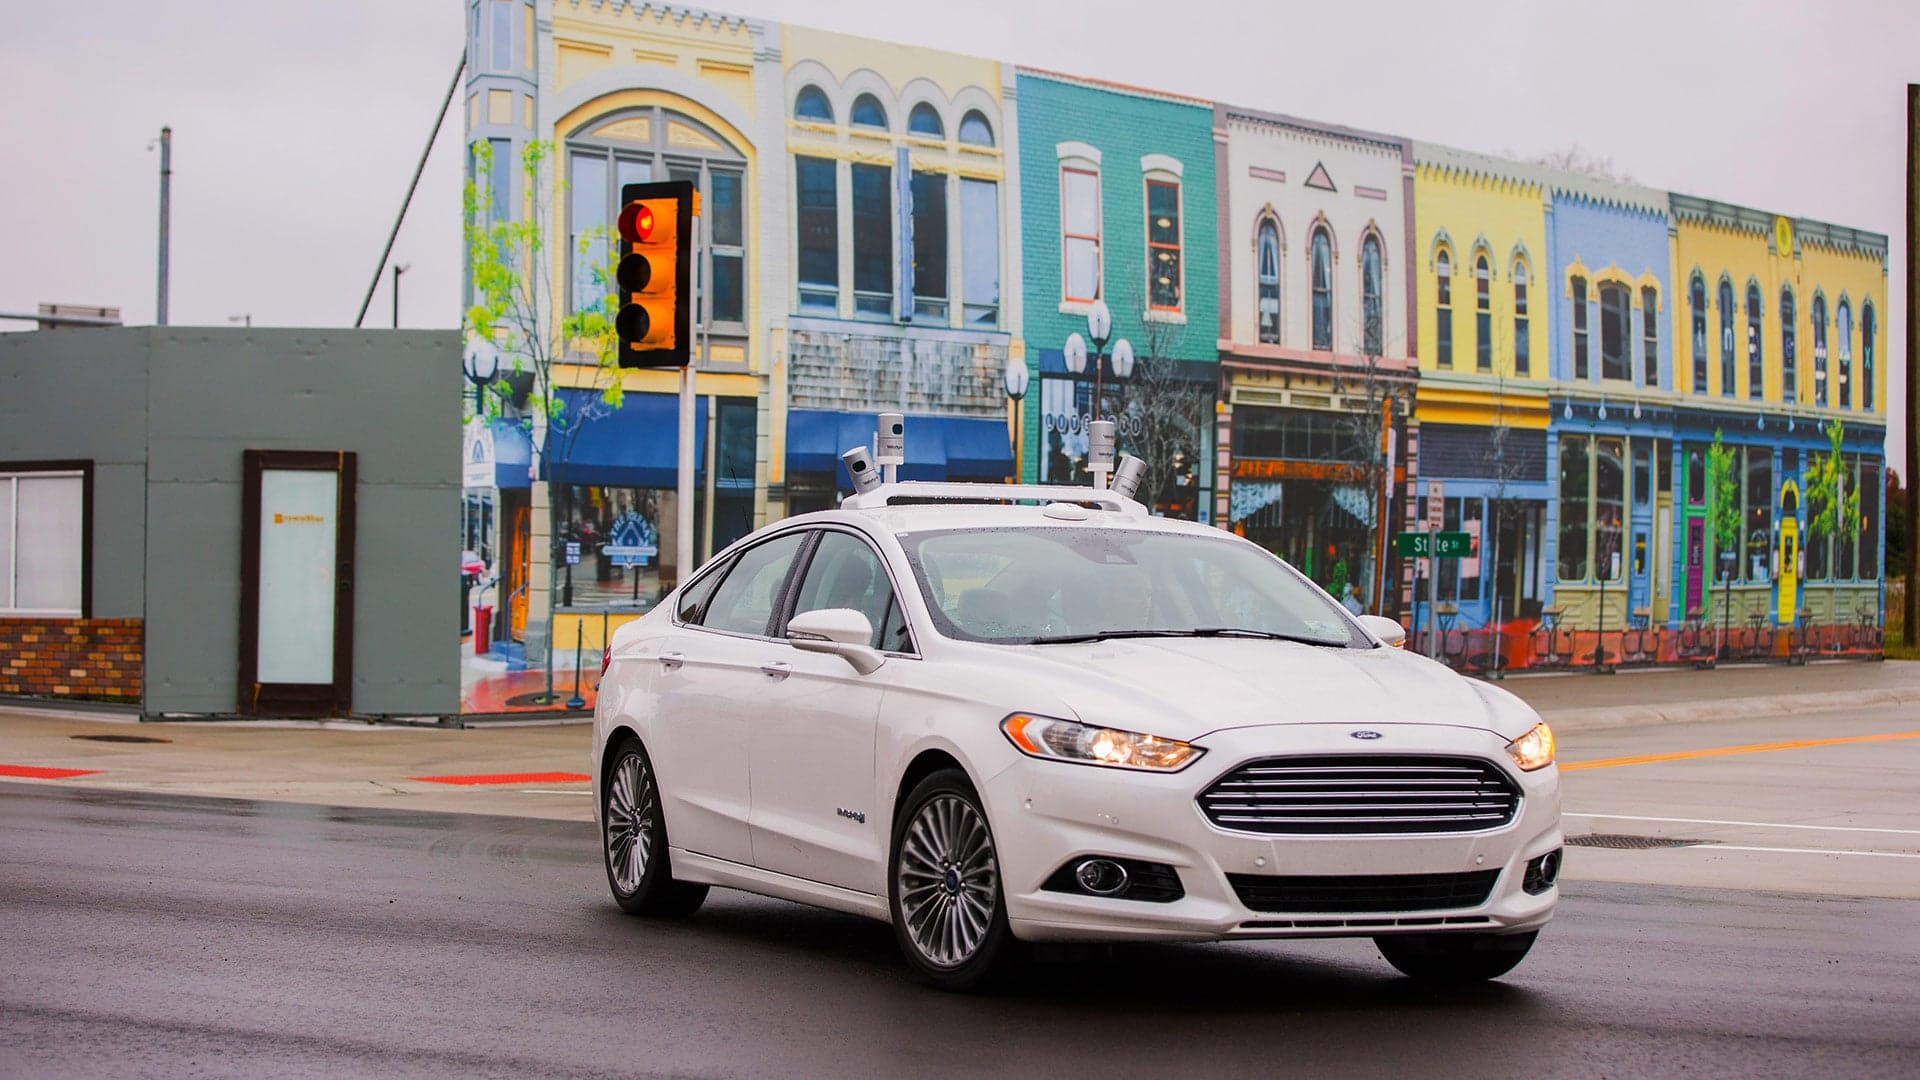 Ford Joins Google, Audi in California Self-Driving Car Tests